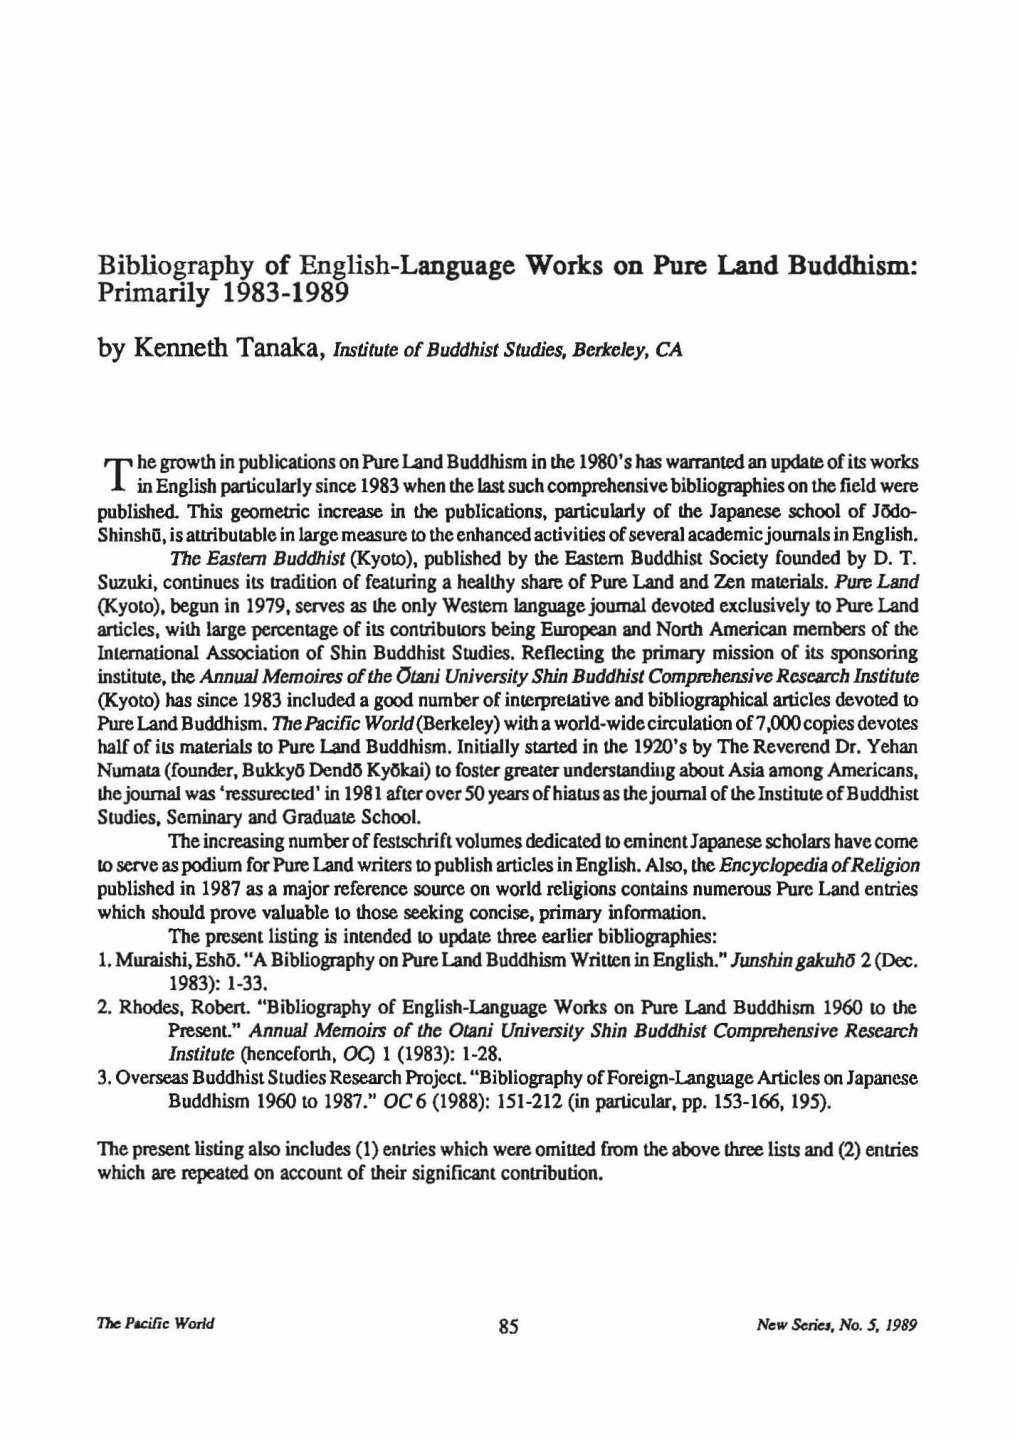 Bibliography of English-Language Works on Pure Land Buddhism: Prhnarily 1983-1989 by Kenneth Tanaka, Institute of Buddhist Studies, Berkeley, CA